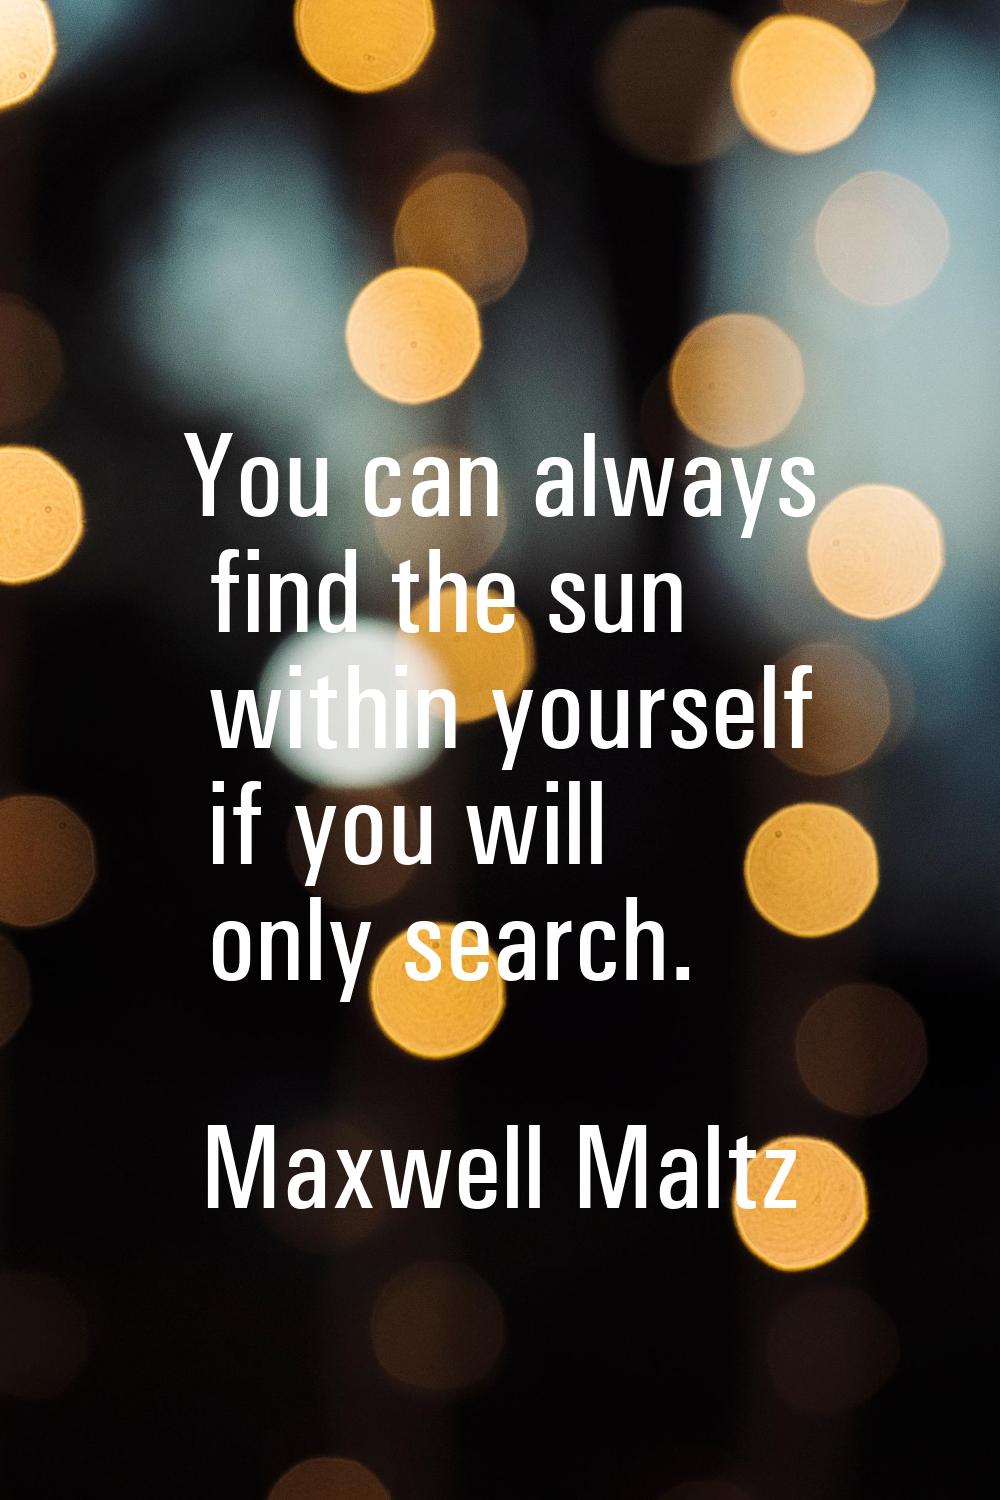 You can always find the sun within yourself if you will only search.